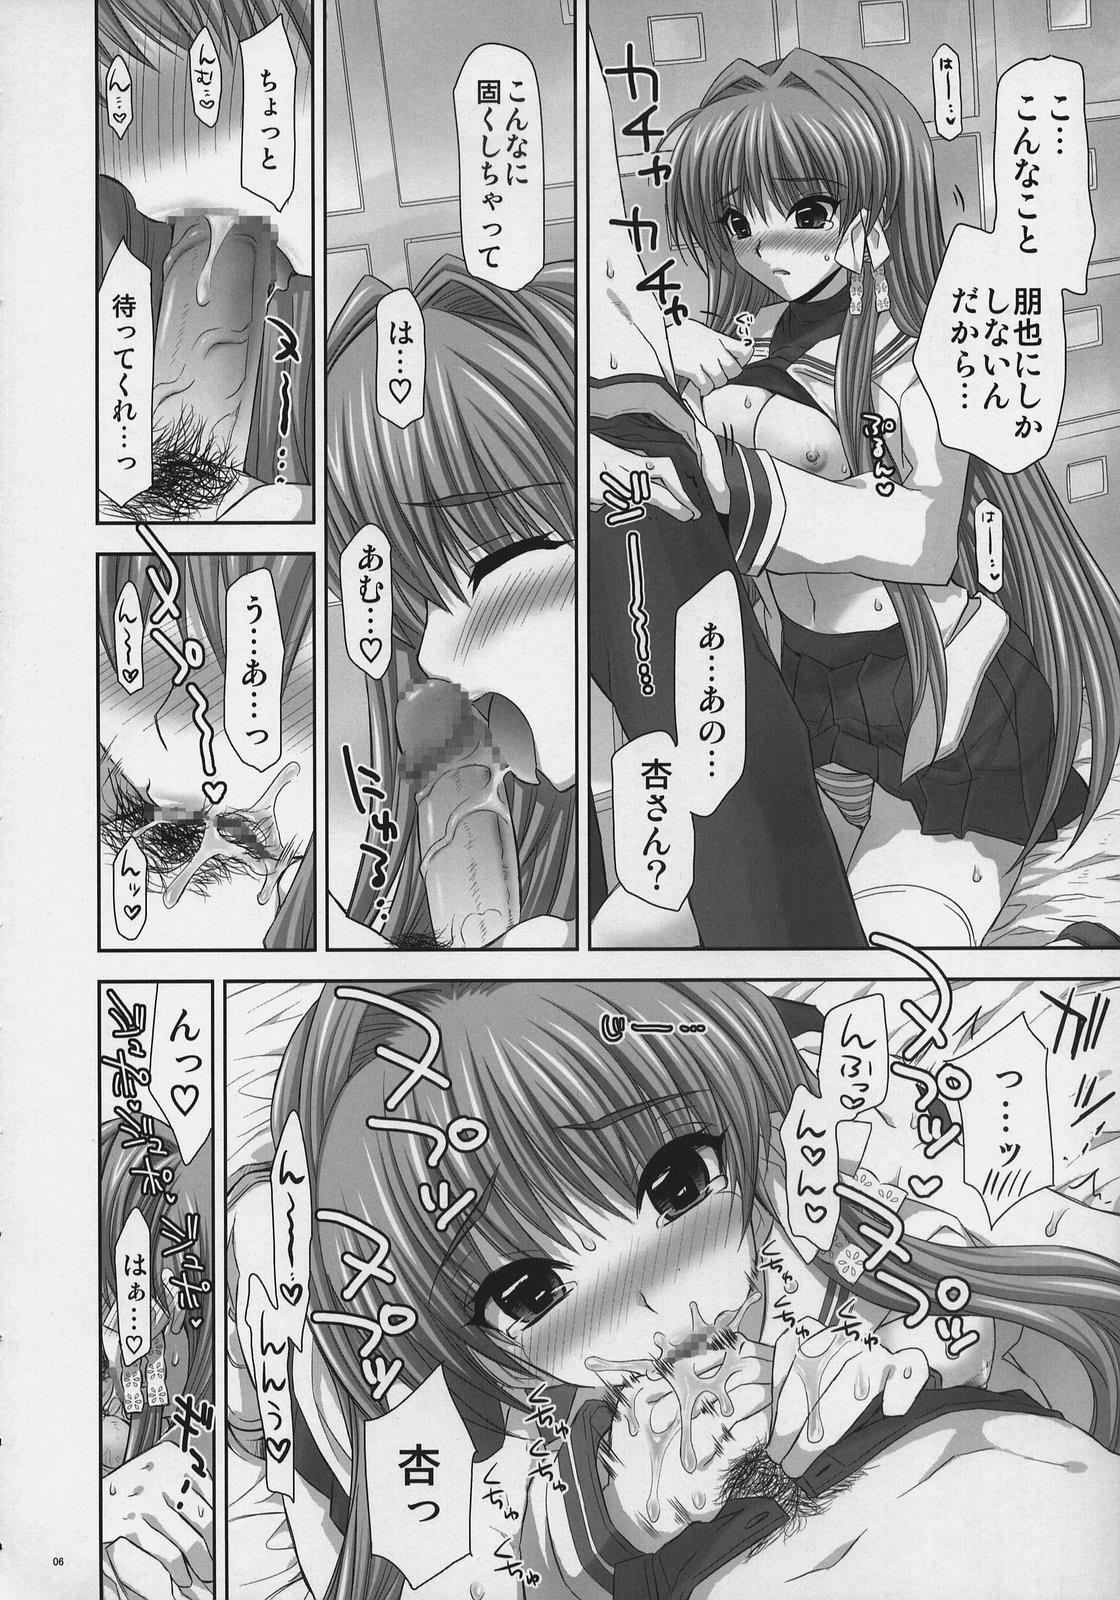 Mamadas BEHAVIOR - Clannad Bamboo blade Brother Sister - Page 5